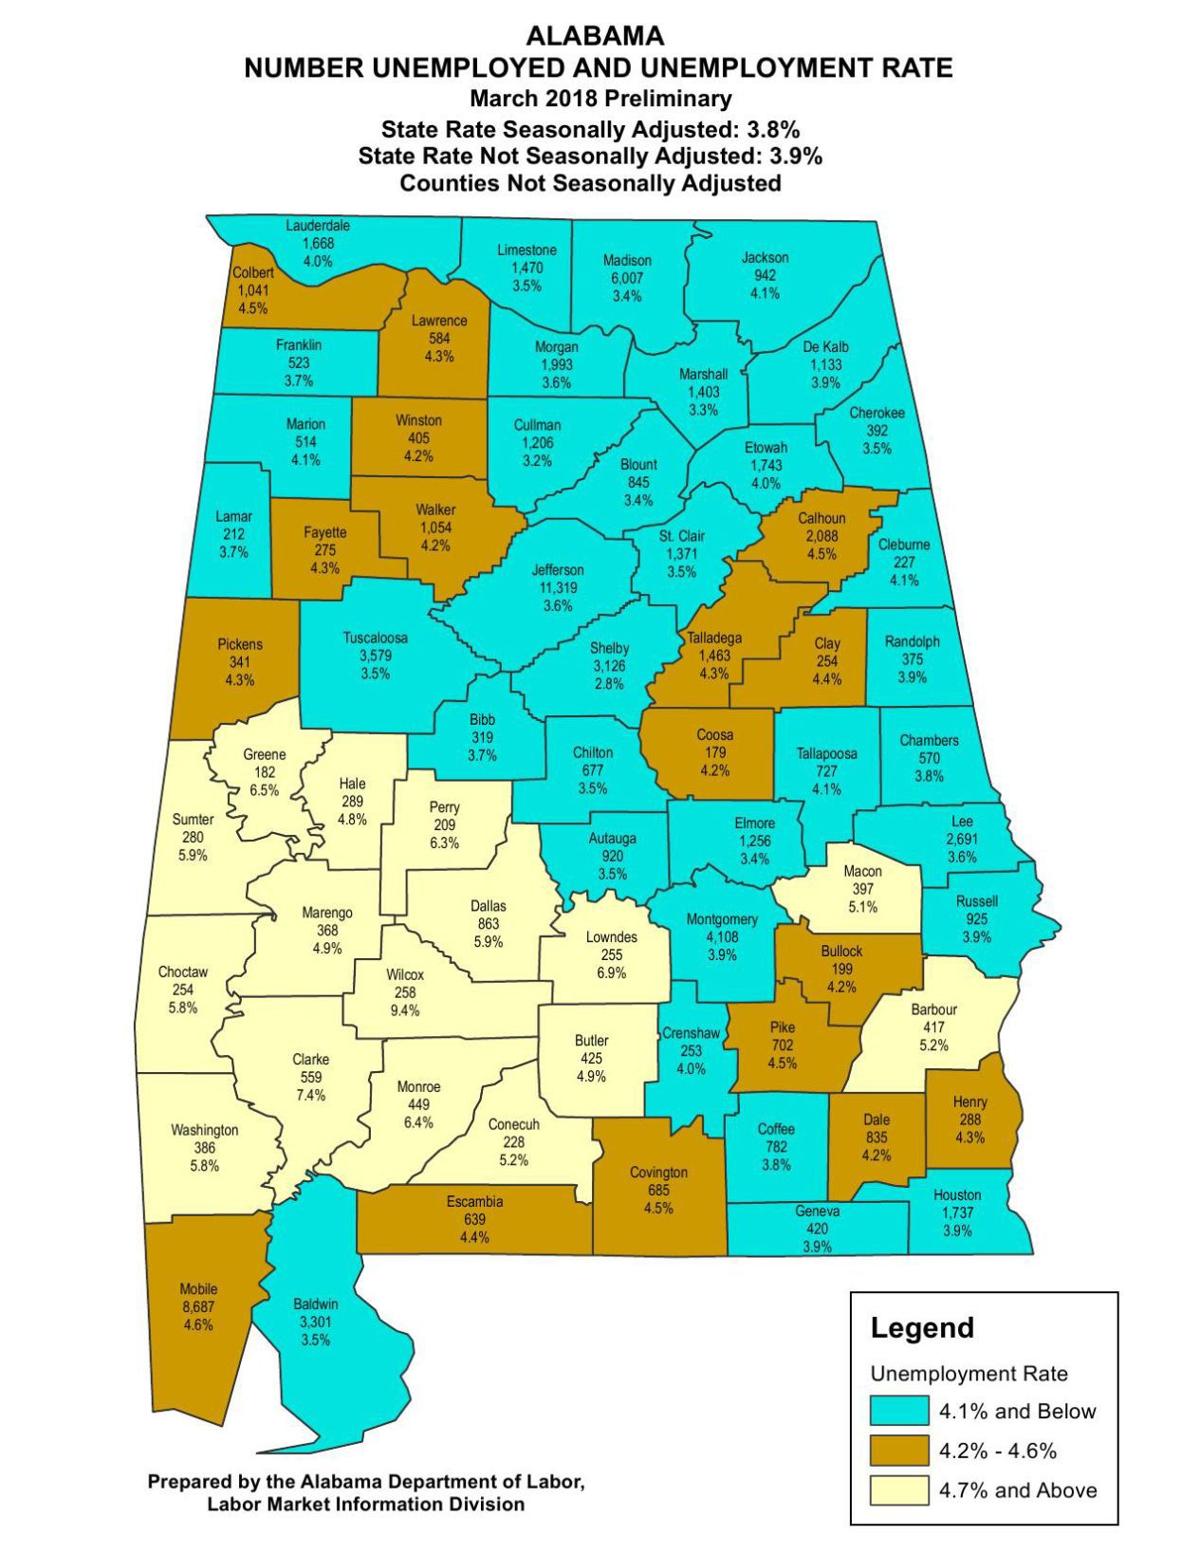 Alabama Number Unemployed and Unemployment Rate March 2018 Preliminary | | timesdaily.com